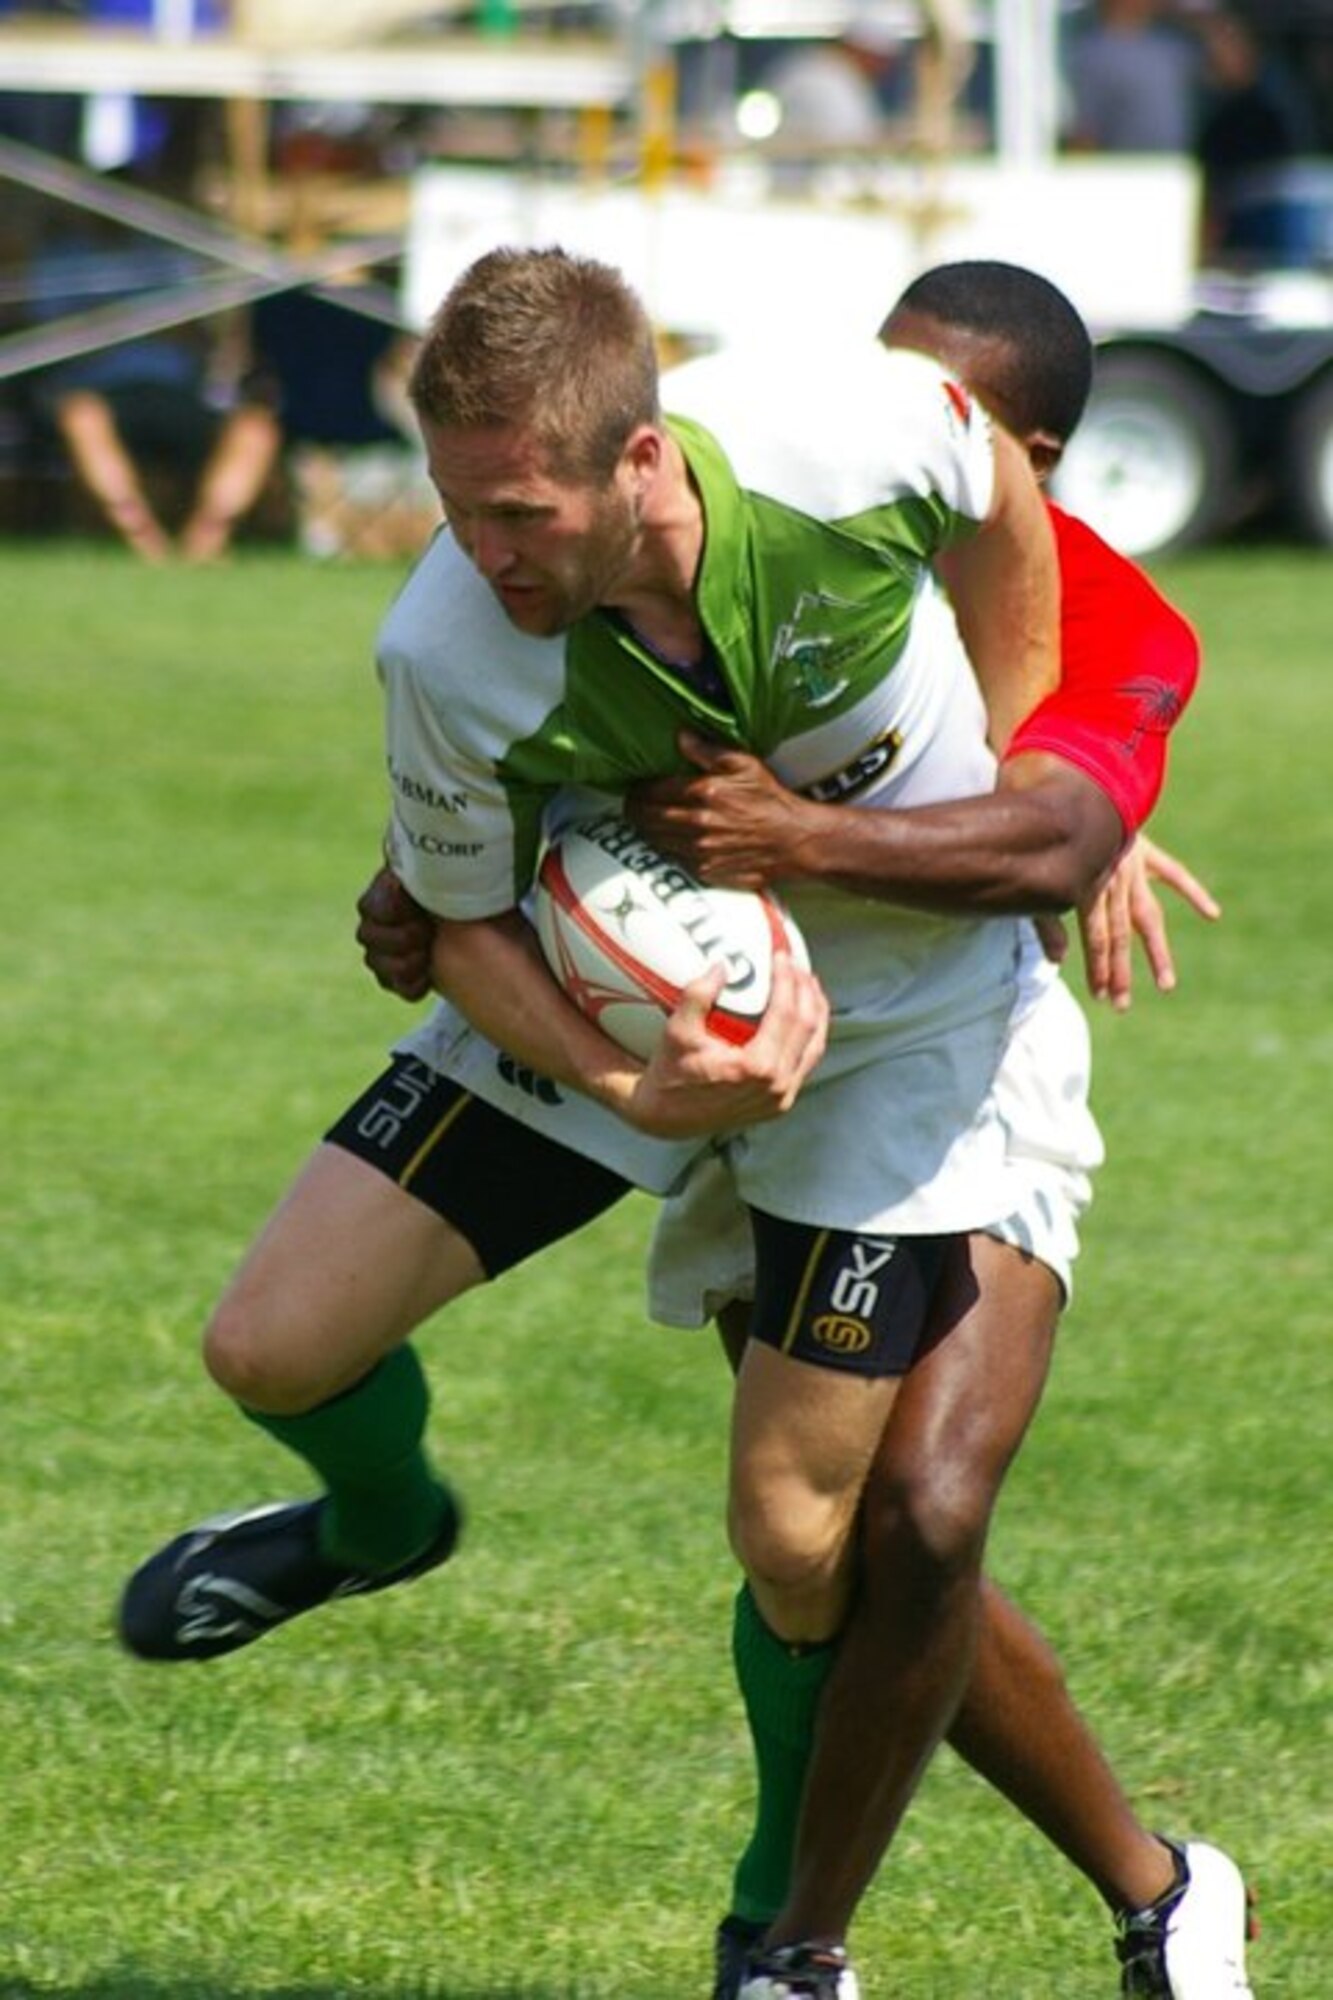 Senior Airman Benjamin A. Haapapuro (pictured holding the ball), a space systems maintainer with the 233rd Space Group, Colorado Air National Guard, is the captain of this year's official Air Force Rugby Team. The team will compete against teams from the other branches of the military to win the Armed Forces Championship during the annual Serevi Rugby 7’s tournament August 14-16 at Infinity Park, Glendale, Colo. (Photo courtesy of Senior Airman Theodore J. Szarzynski)